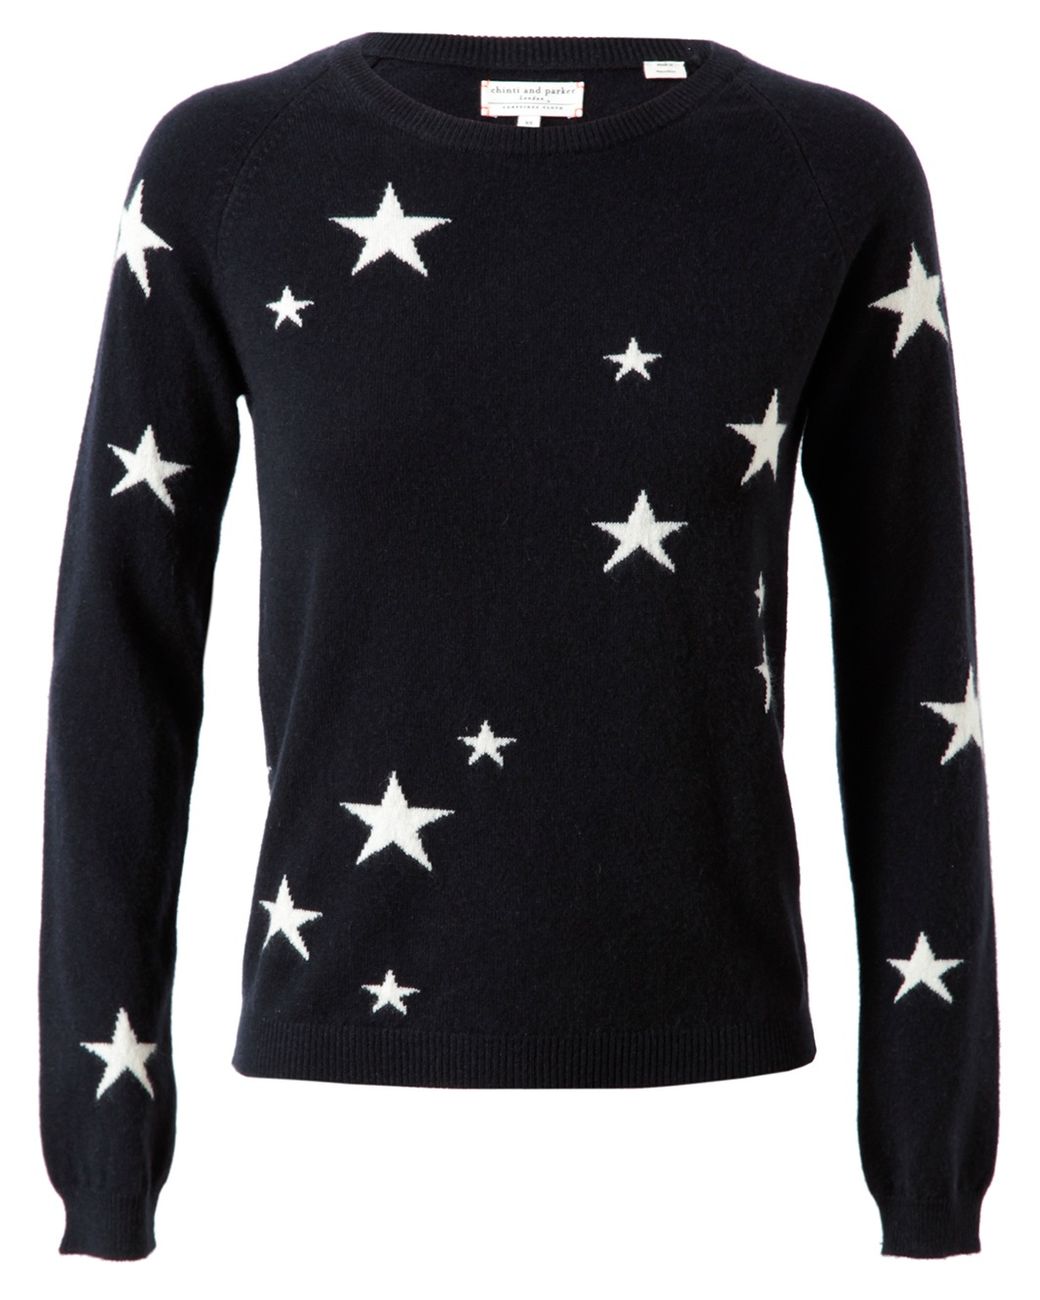 Lyst - Chinti & parker Star Intarsia Sweater in Blue - Save 61%